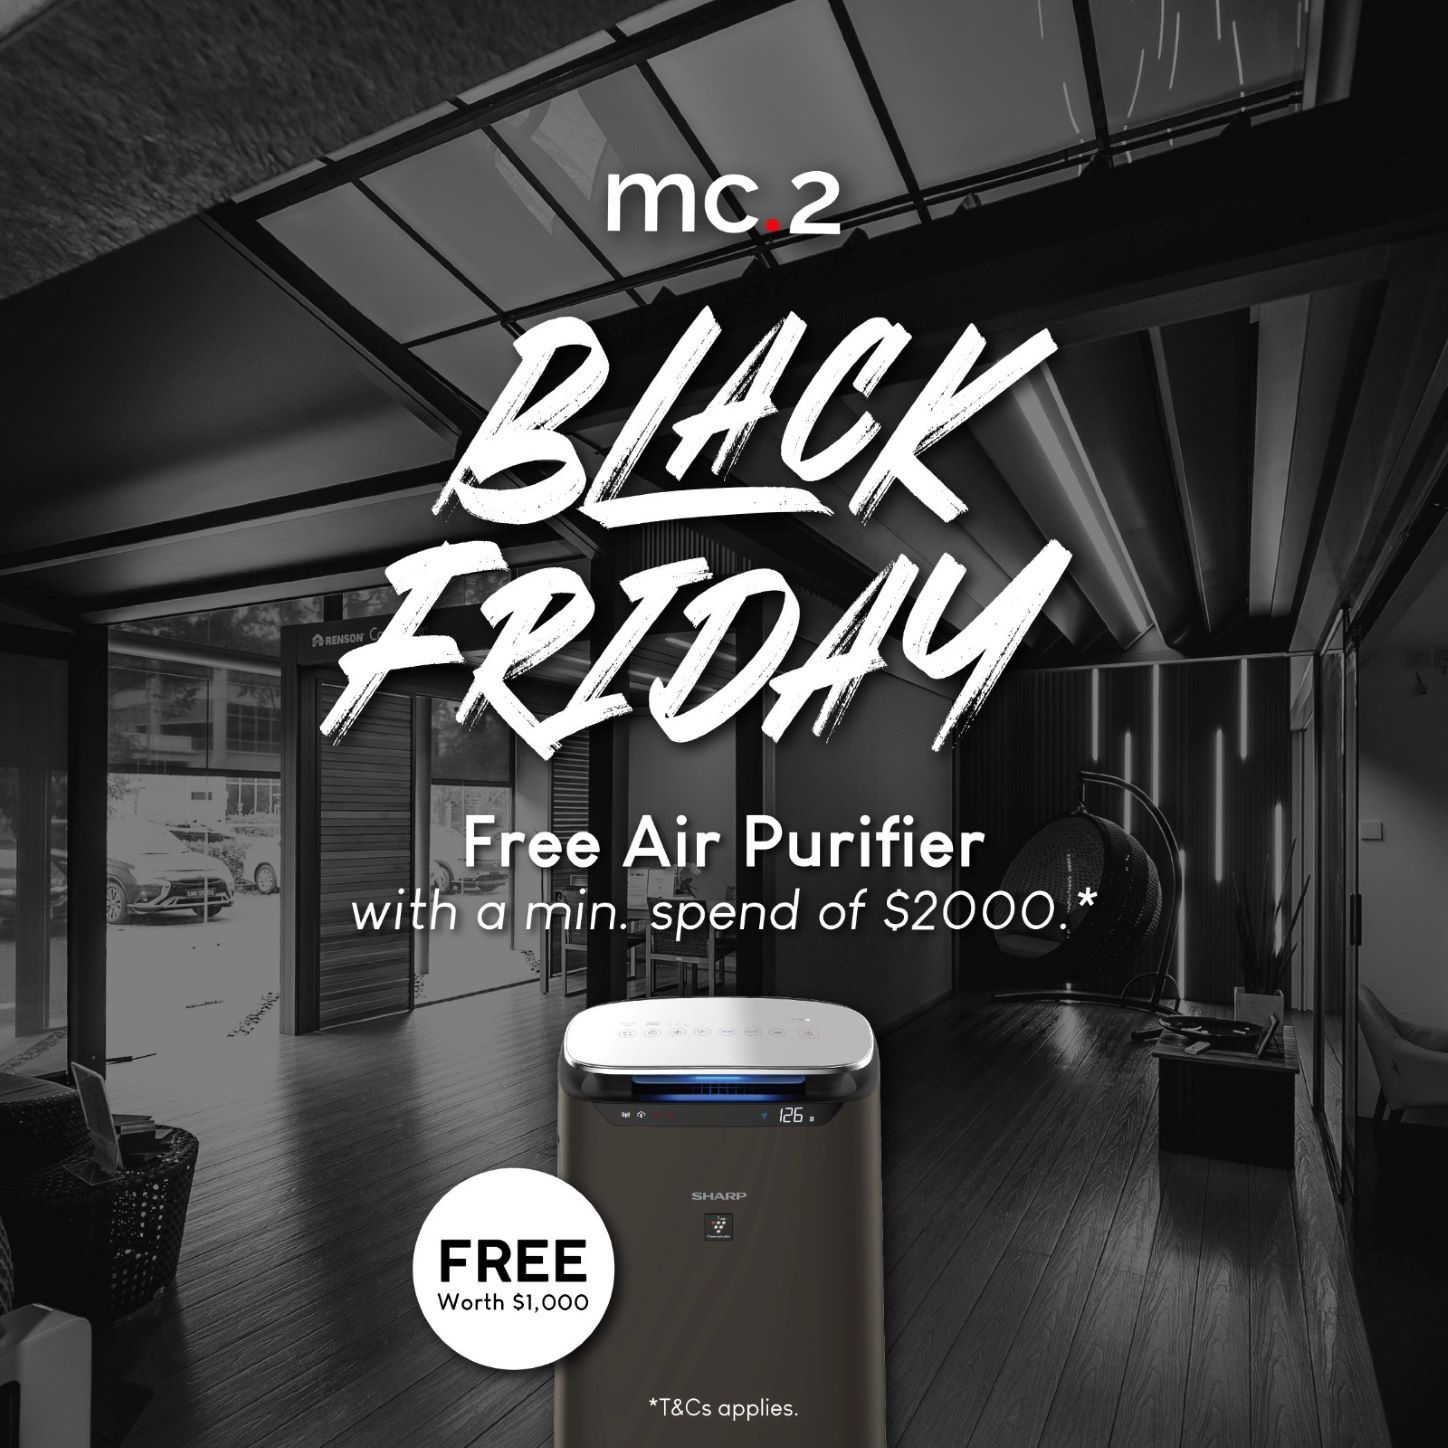 Free Air Purifier with $2,000 Spending at mc.2!